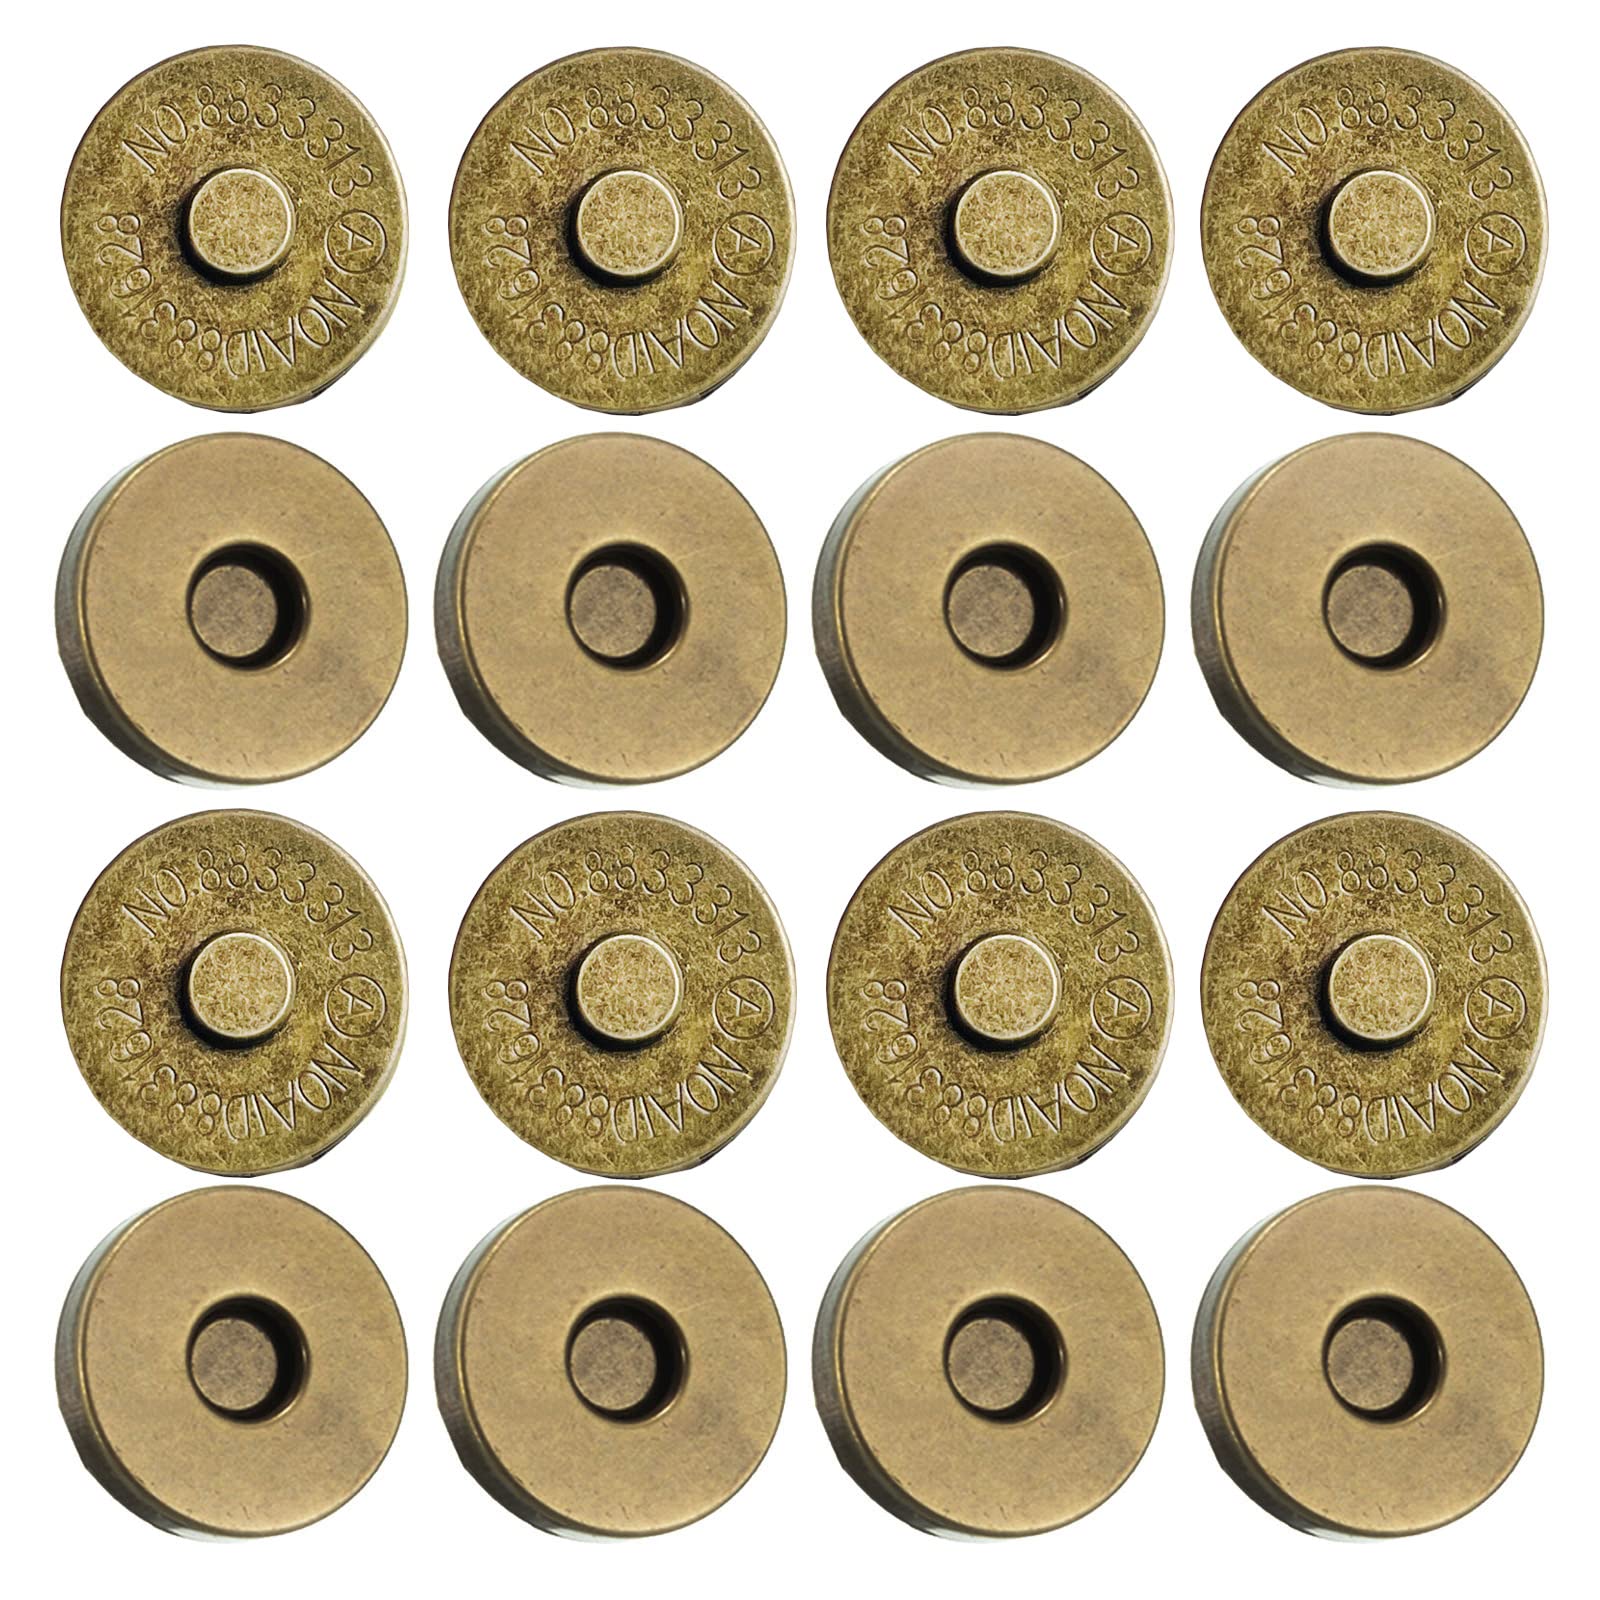  1st Choice Magnetic Button Clasp Snaps - Purses, Bags, Clothes  - No Tools Required - Choose Small or Large Magnetic button size: 18mm